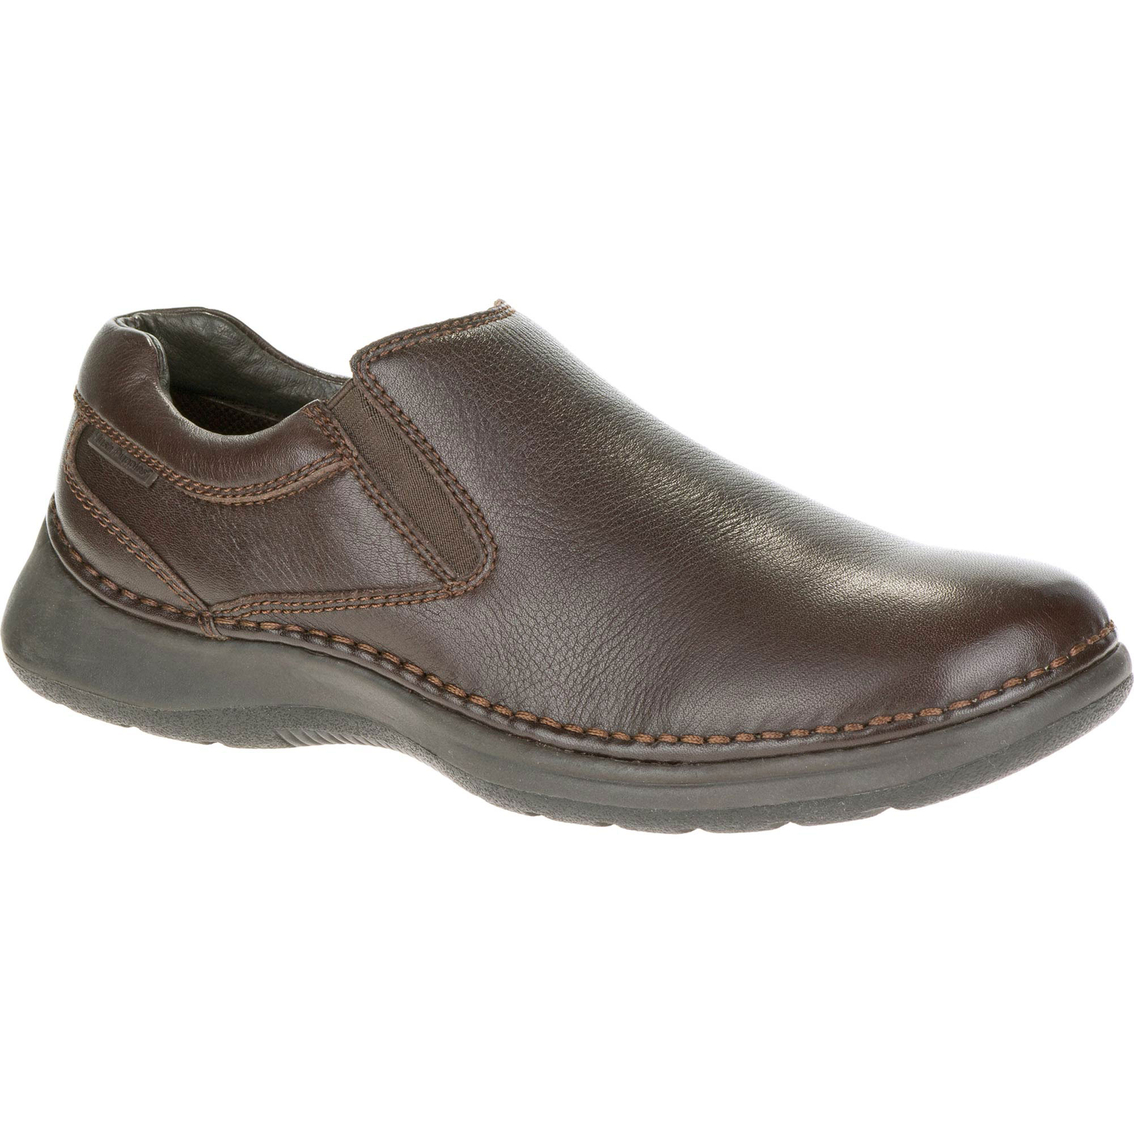 Hush Puppies Men's Lunar Ii Casual Slip On Shoes | Casuals | Shoes ...